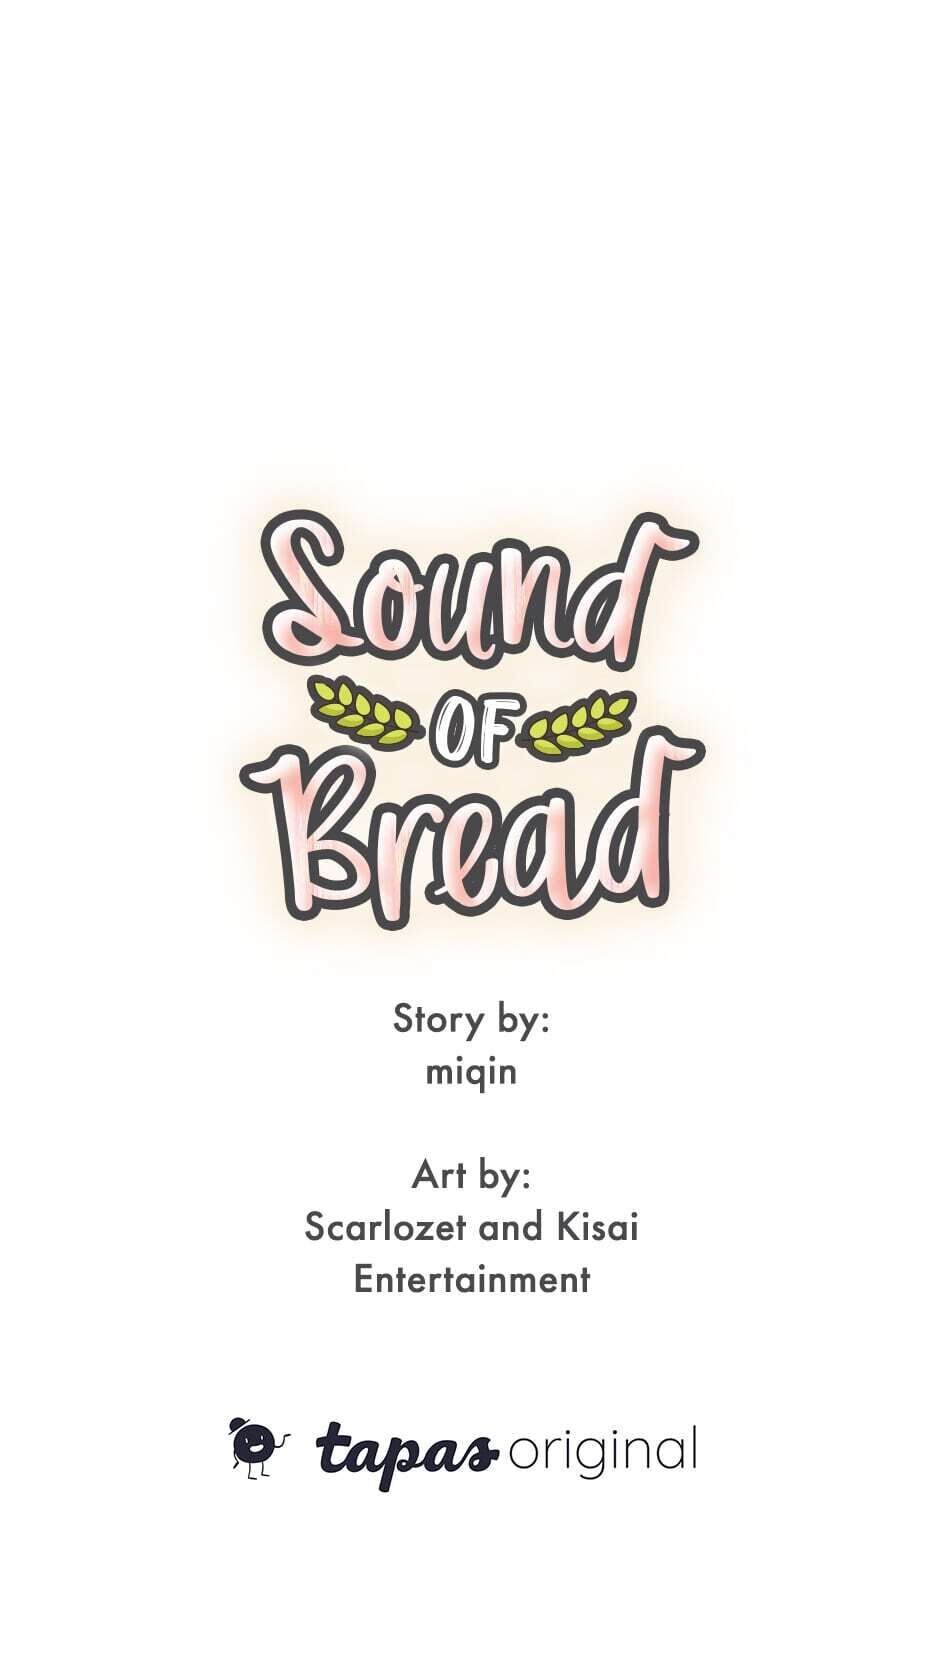 Sound Of Bread chapter 3